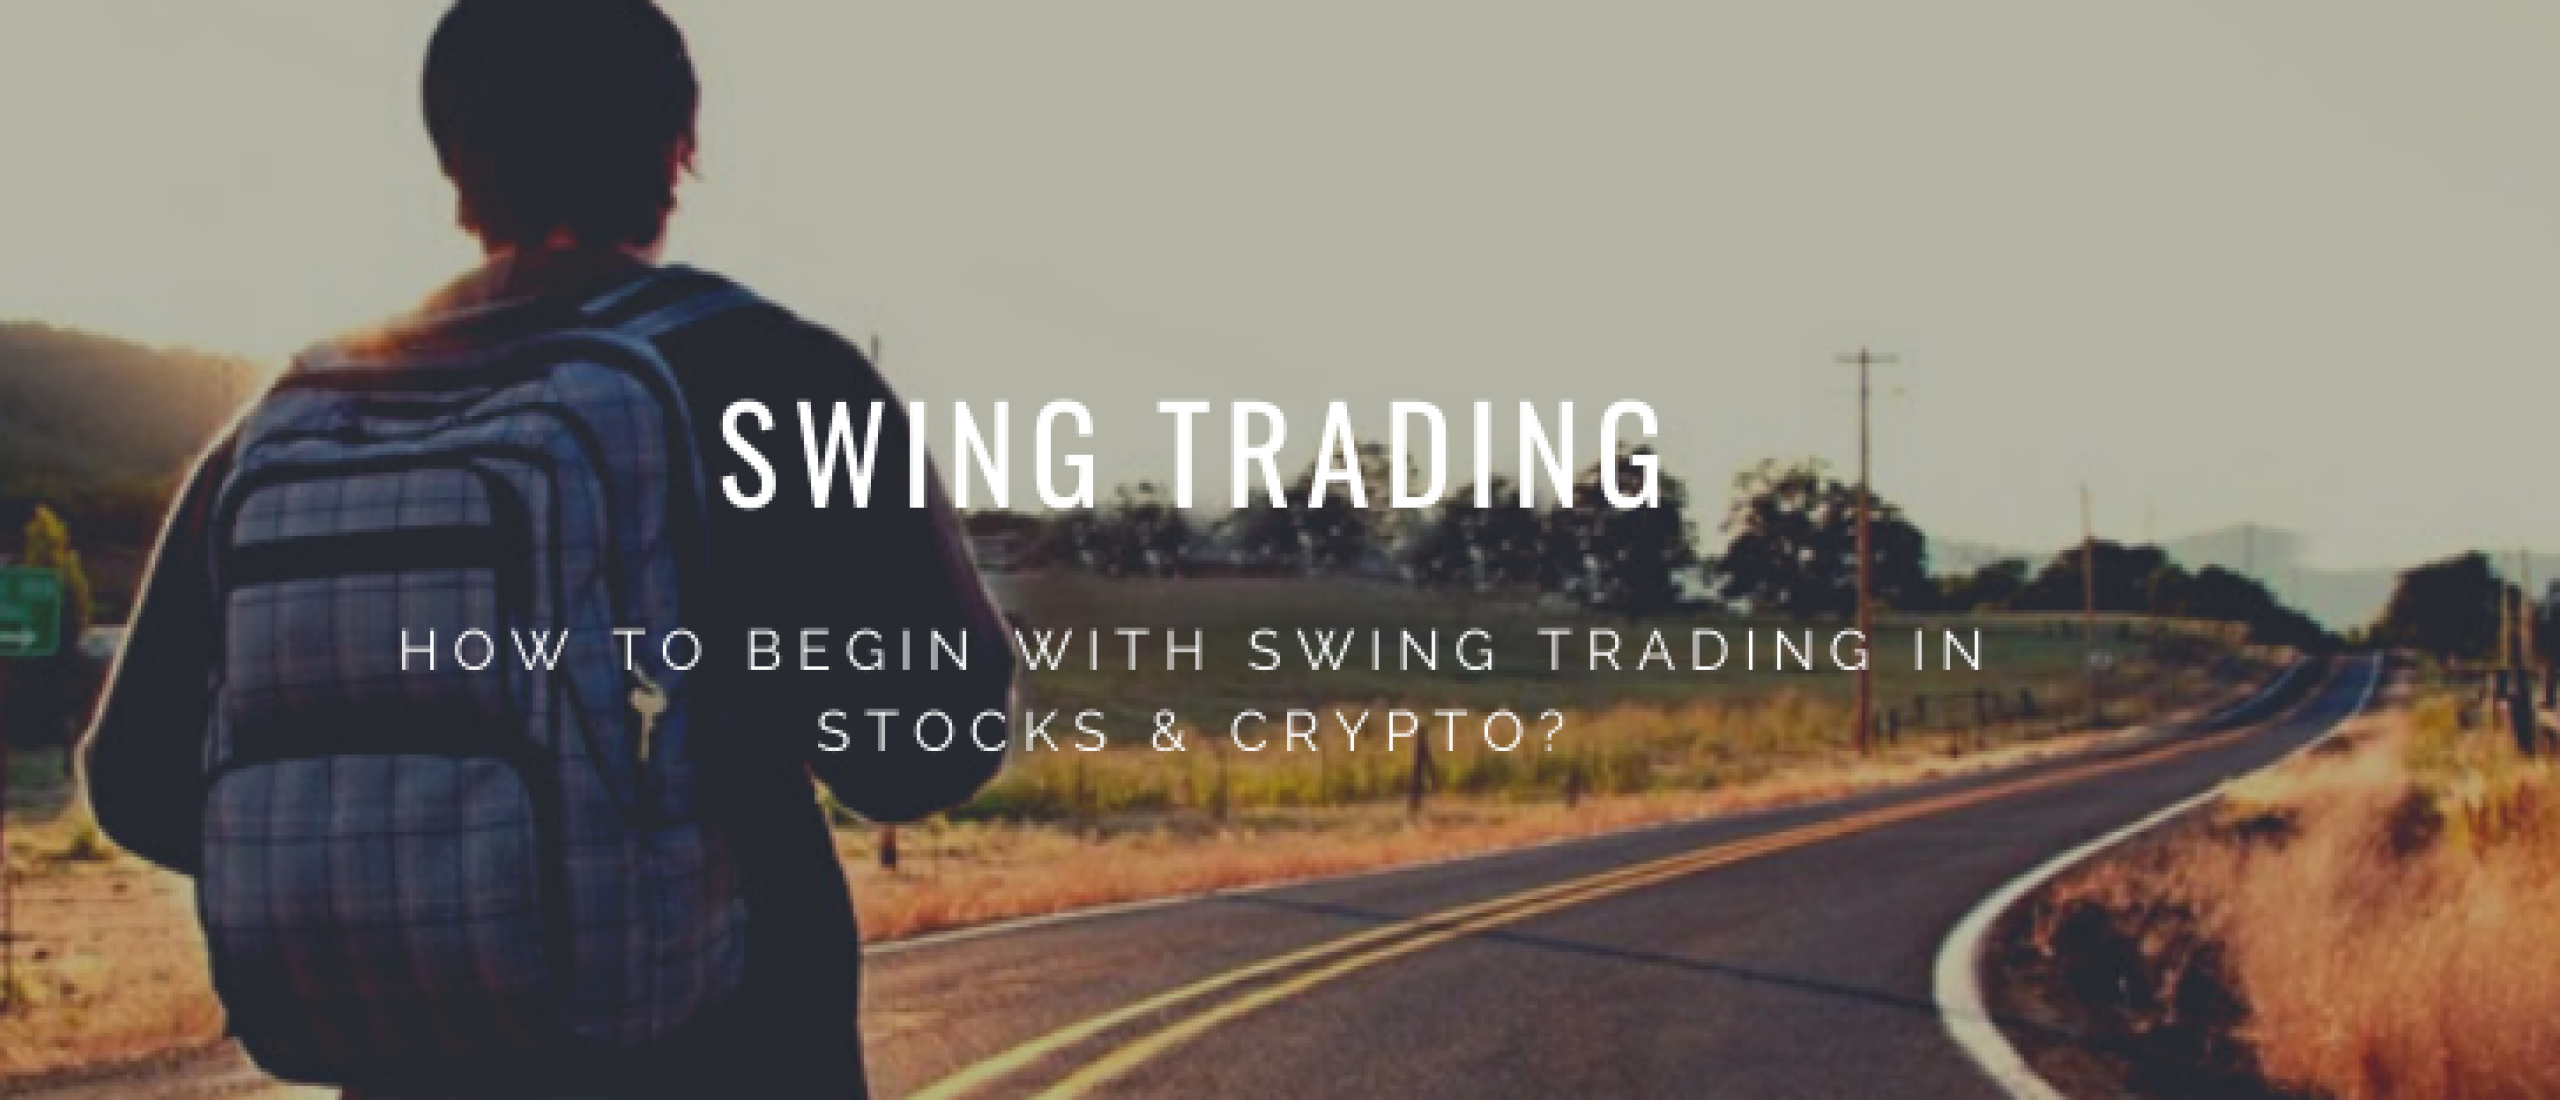 Swing Trading for Beginners in Stocks and Crypto